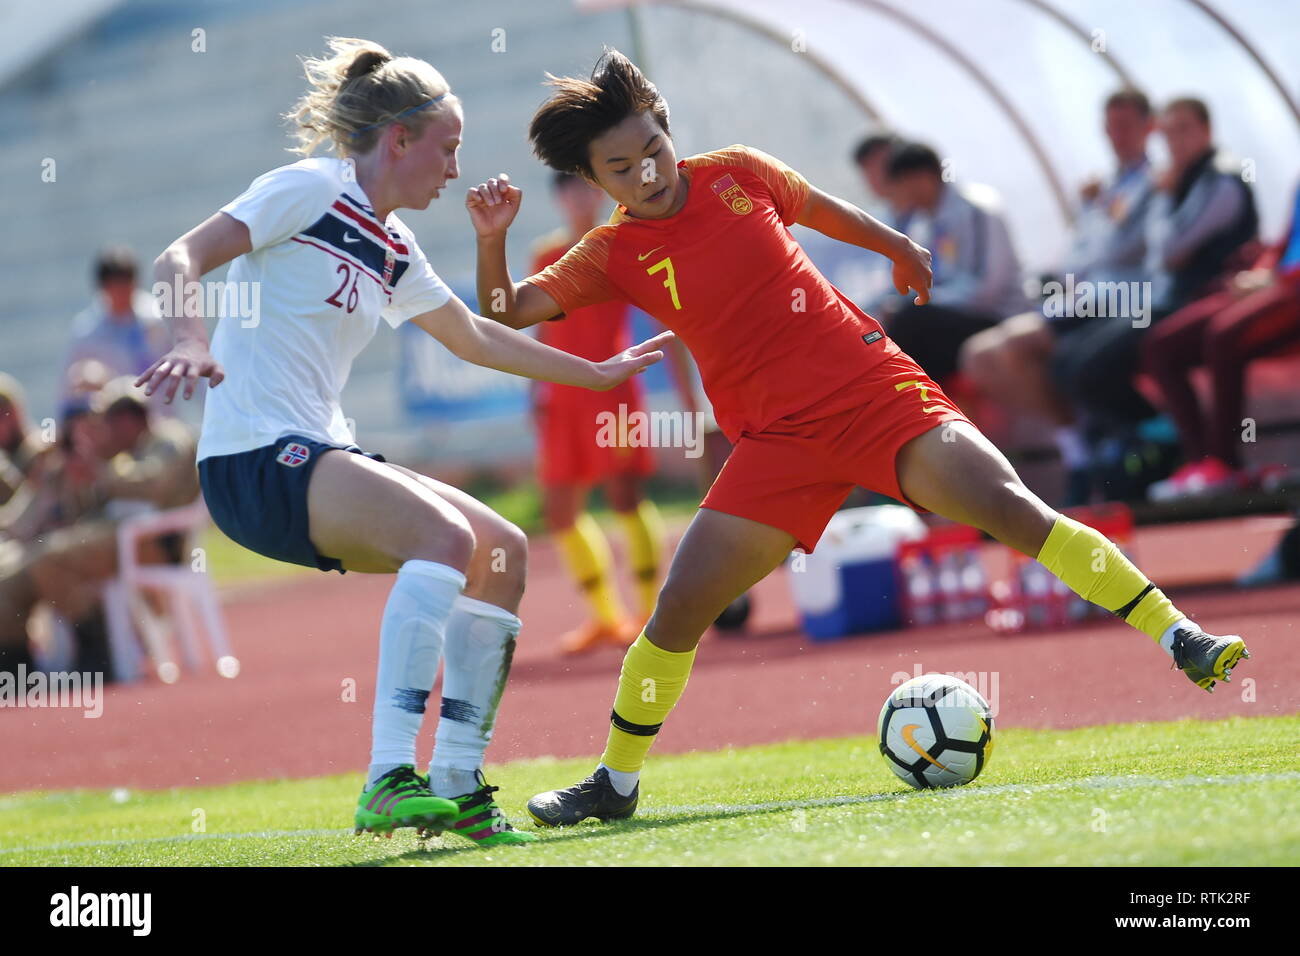 Albufeira, Portugal. 1st Mar, 2019. China's Wang Shuang (R) vies with Norway's Ina Gausdal during the Group C match at the 2019 Algarve Cup women's soccer invitational tournament in Albufeira, Portugal, March 1, 2019. Norway won 3-1. Credit: Zheng Huansong/Xinhua/Alamy Live News Stock Photo